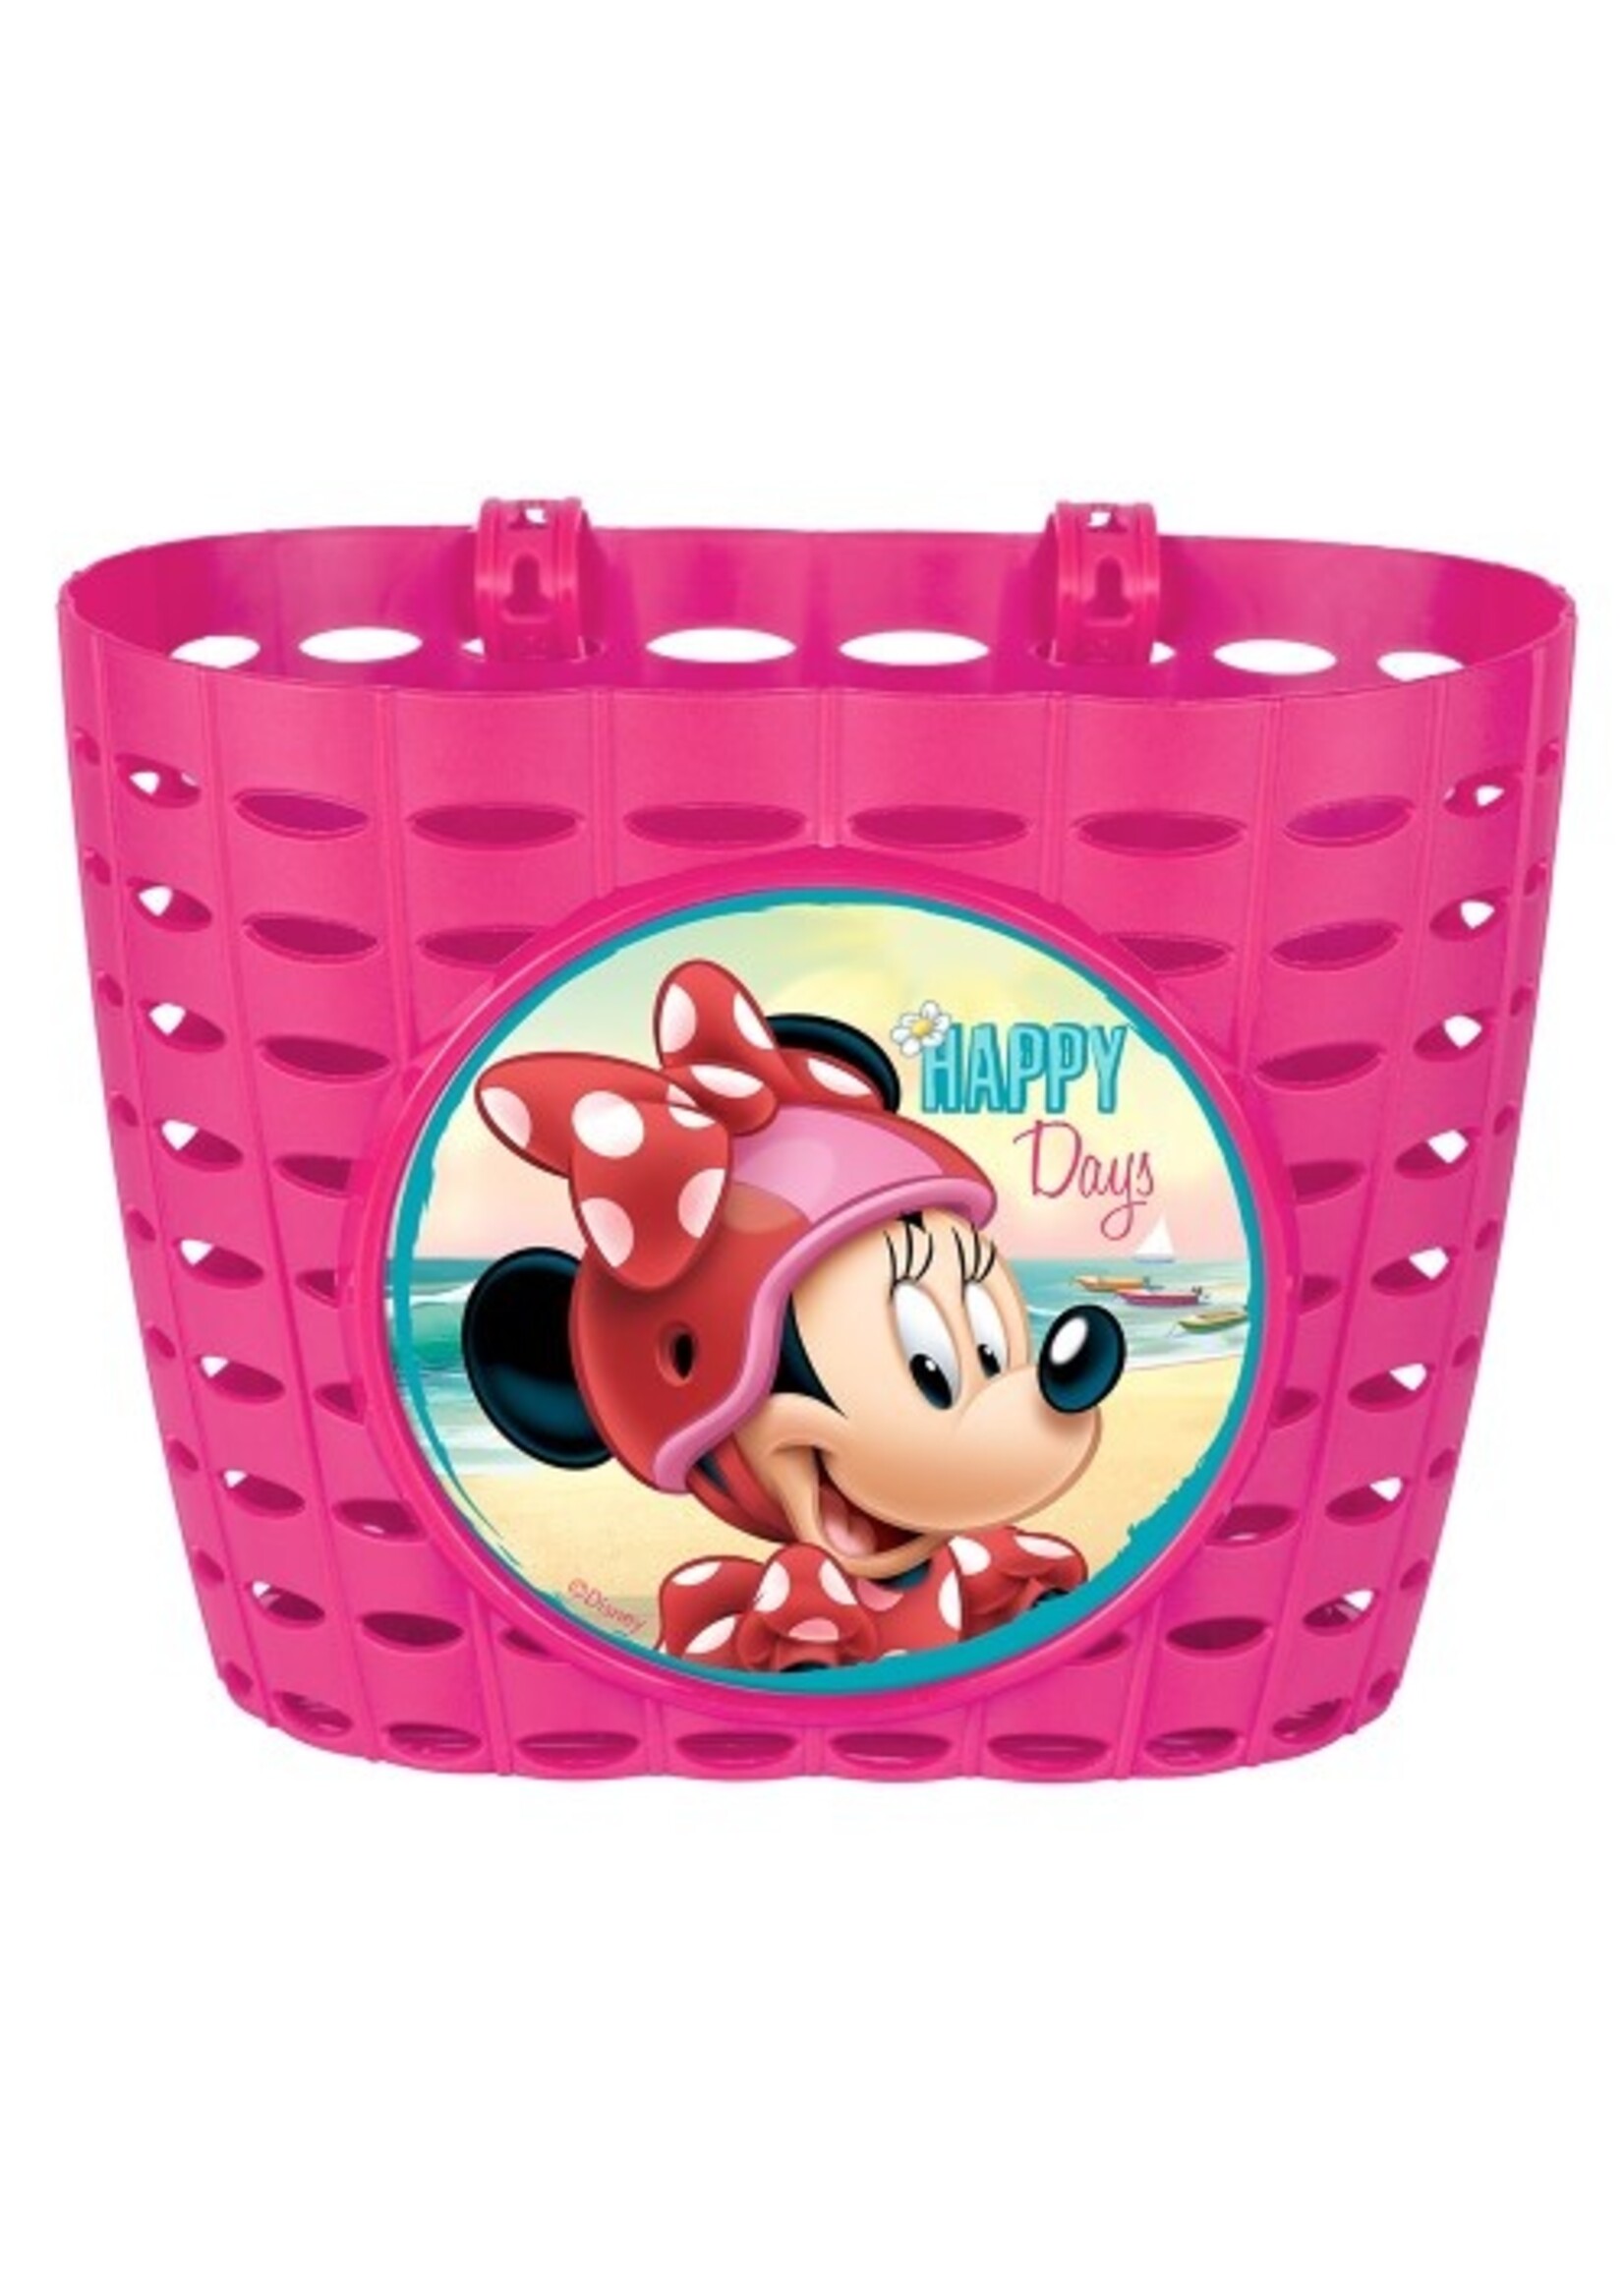 Disney Minnie Mouse Bicycle Basket from Disney pink